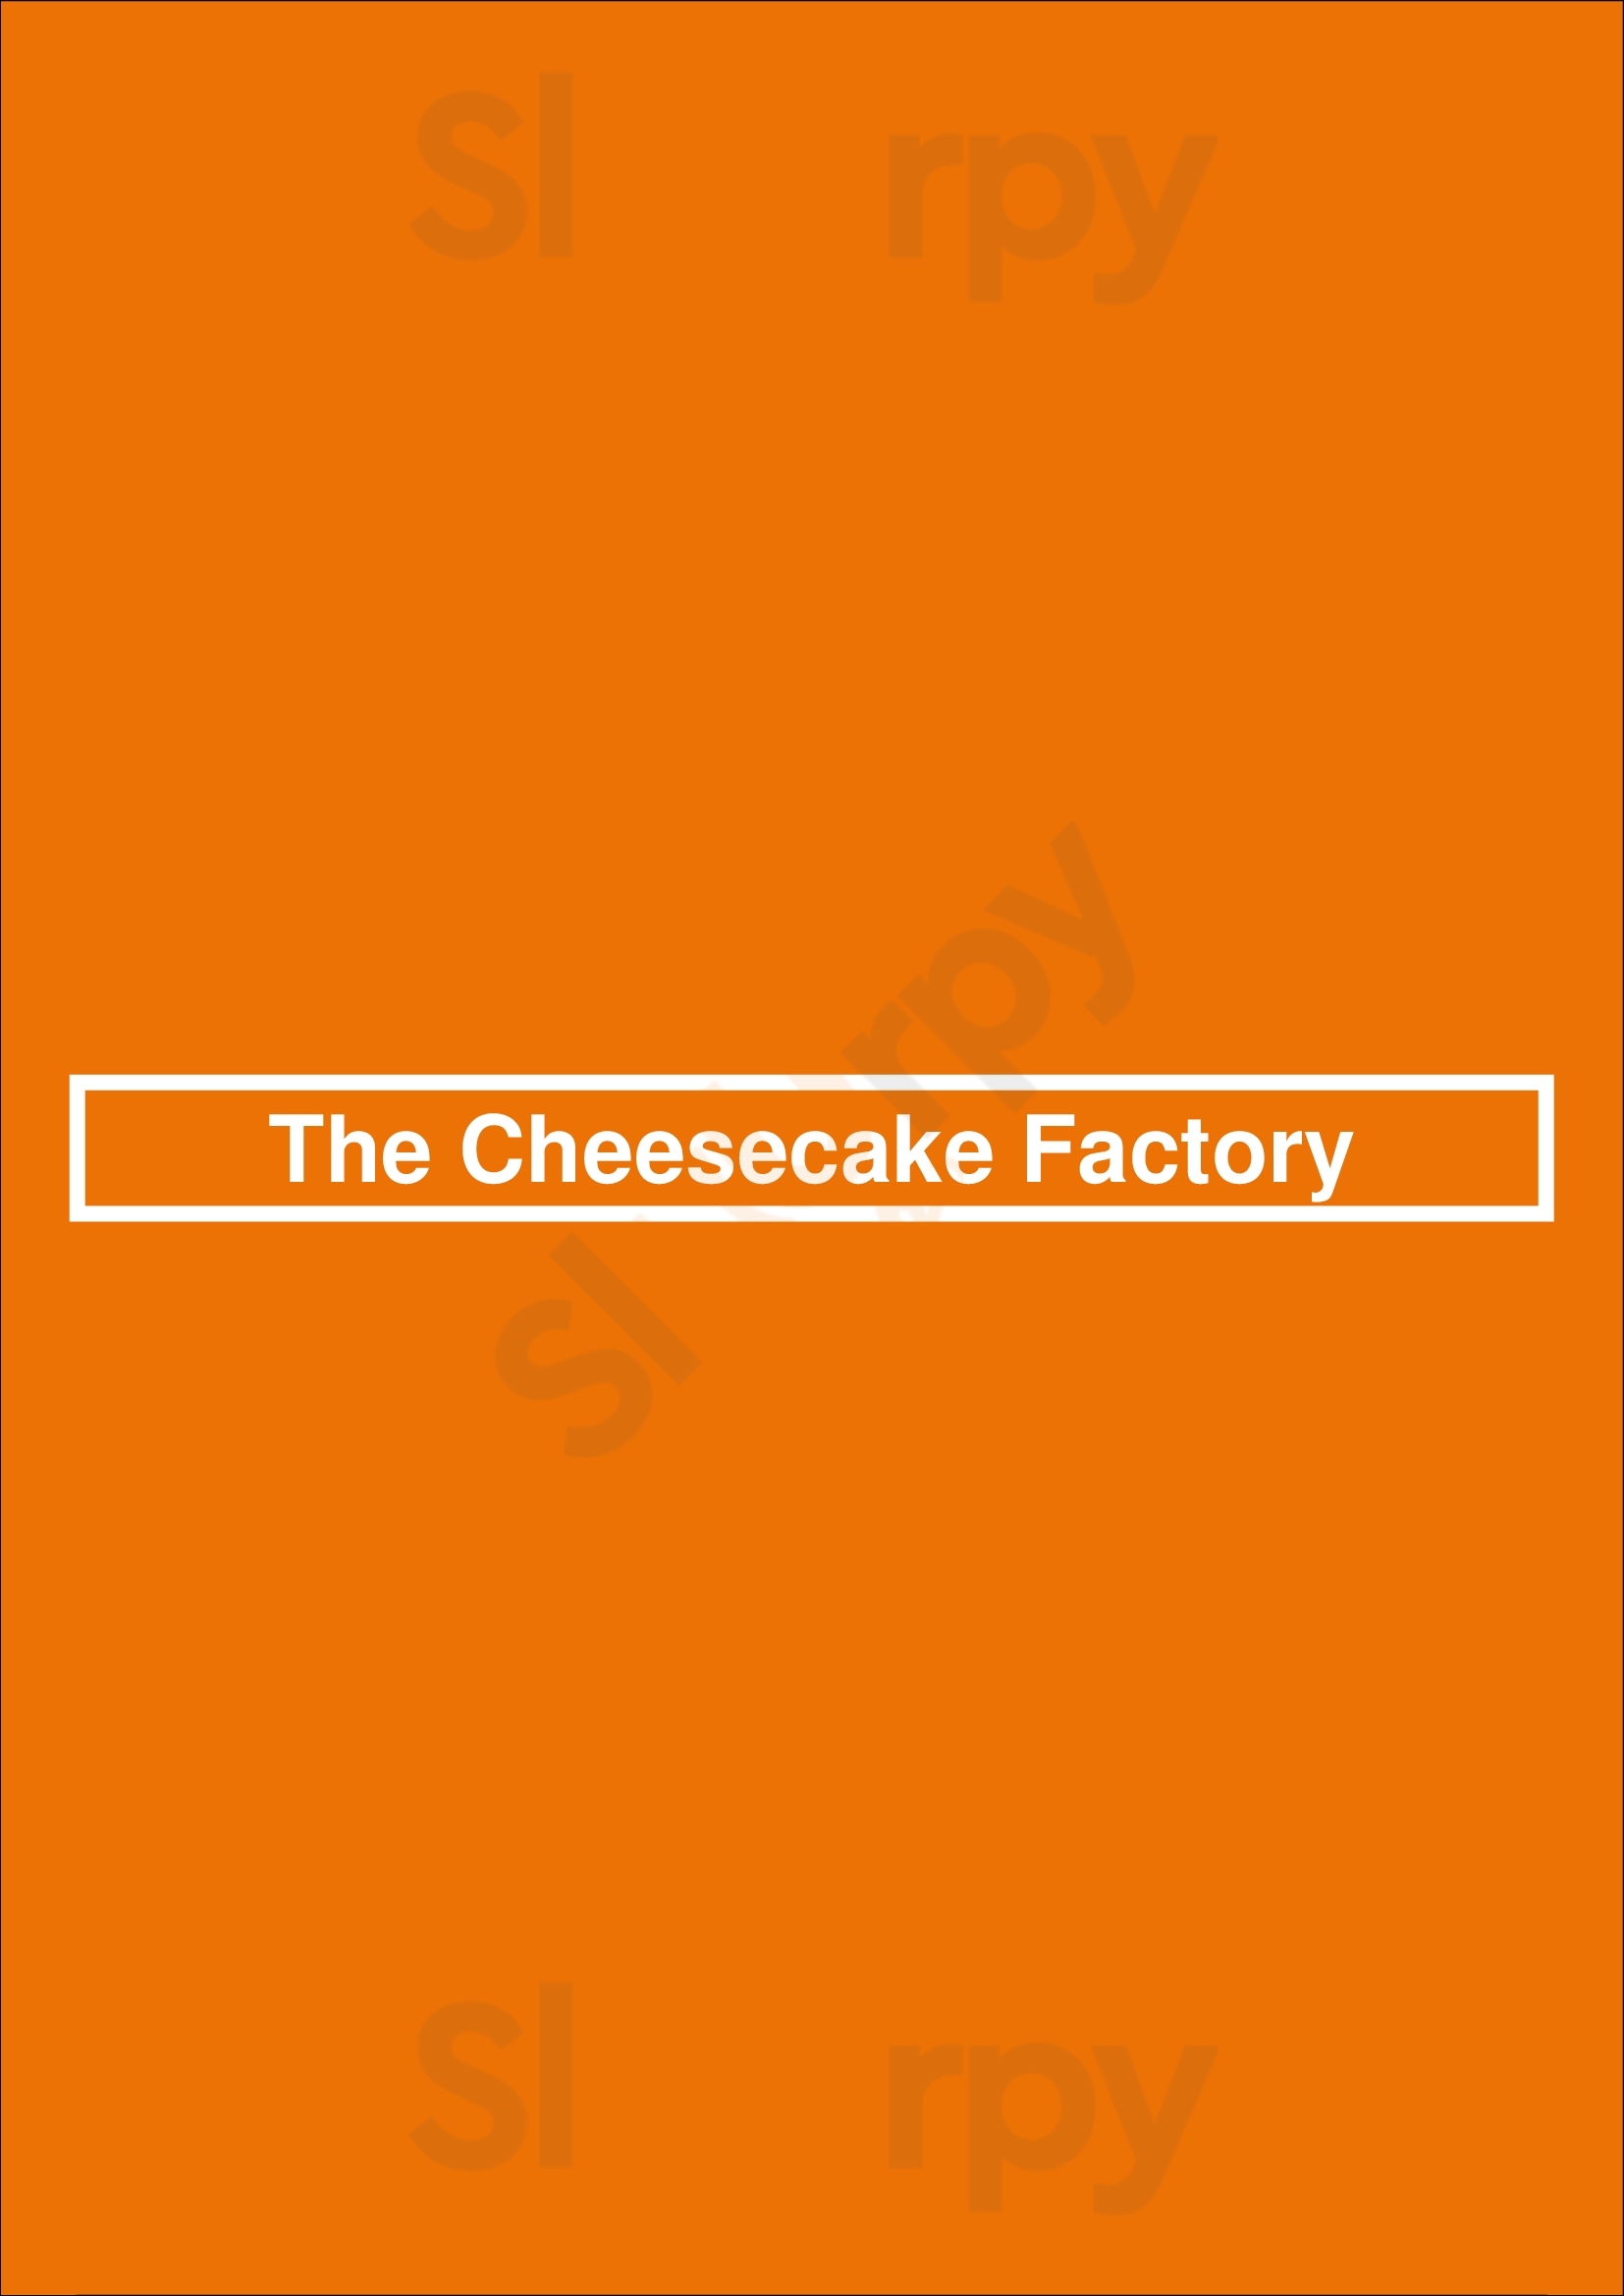 The Cheesecake Factory Knoxville Menu - 1